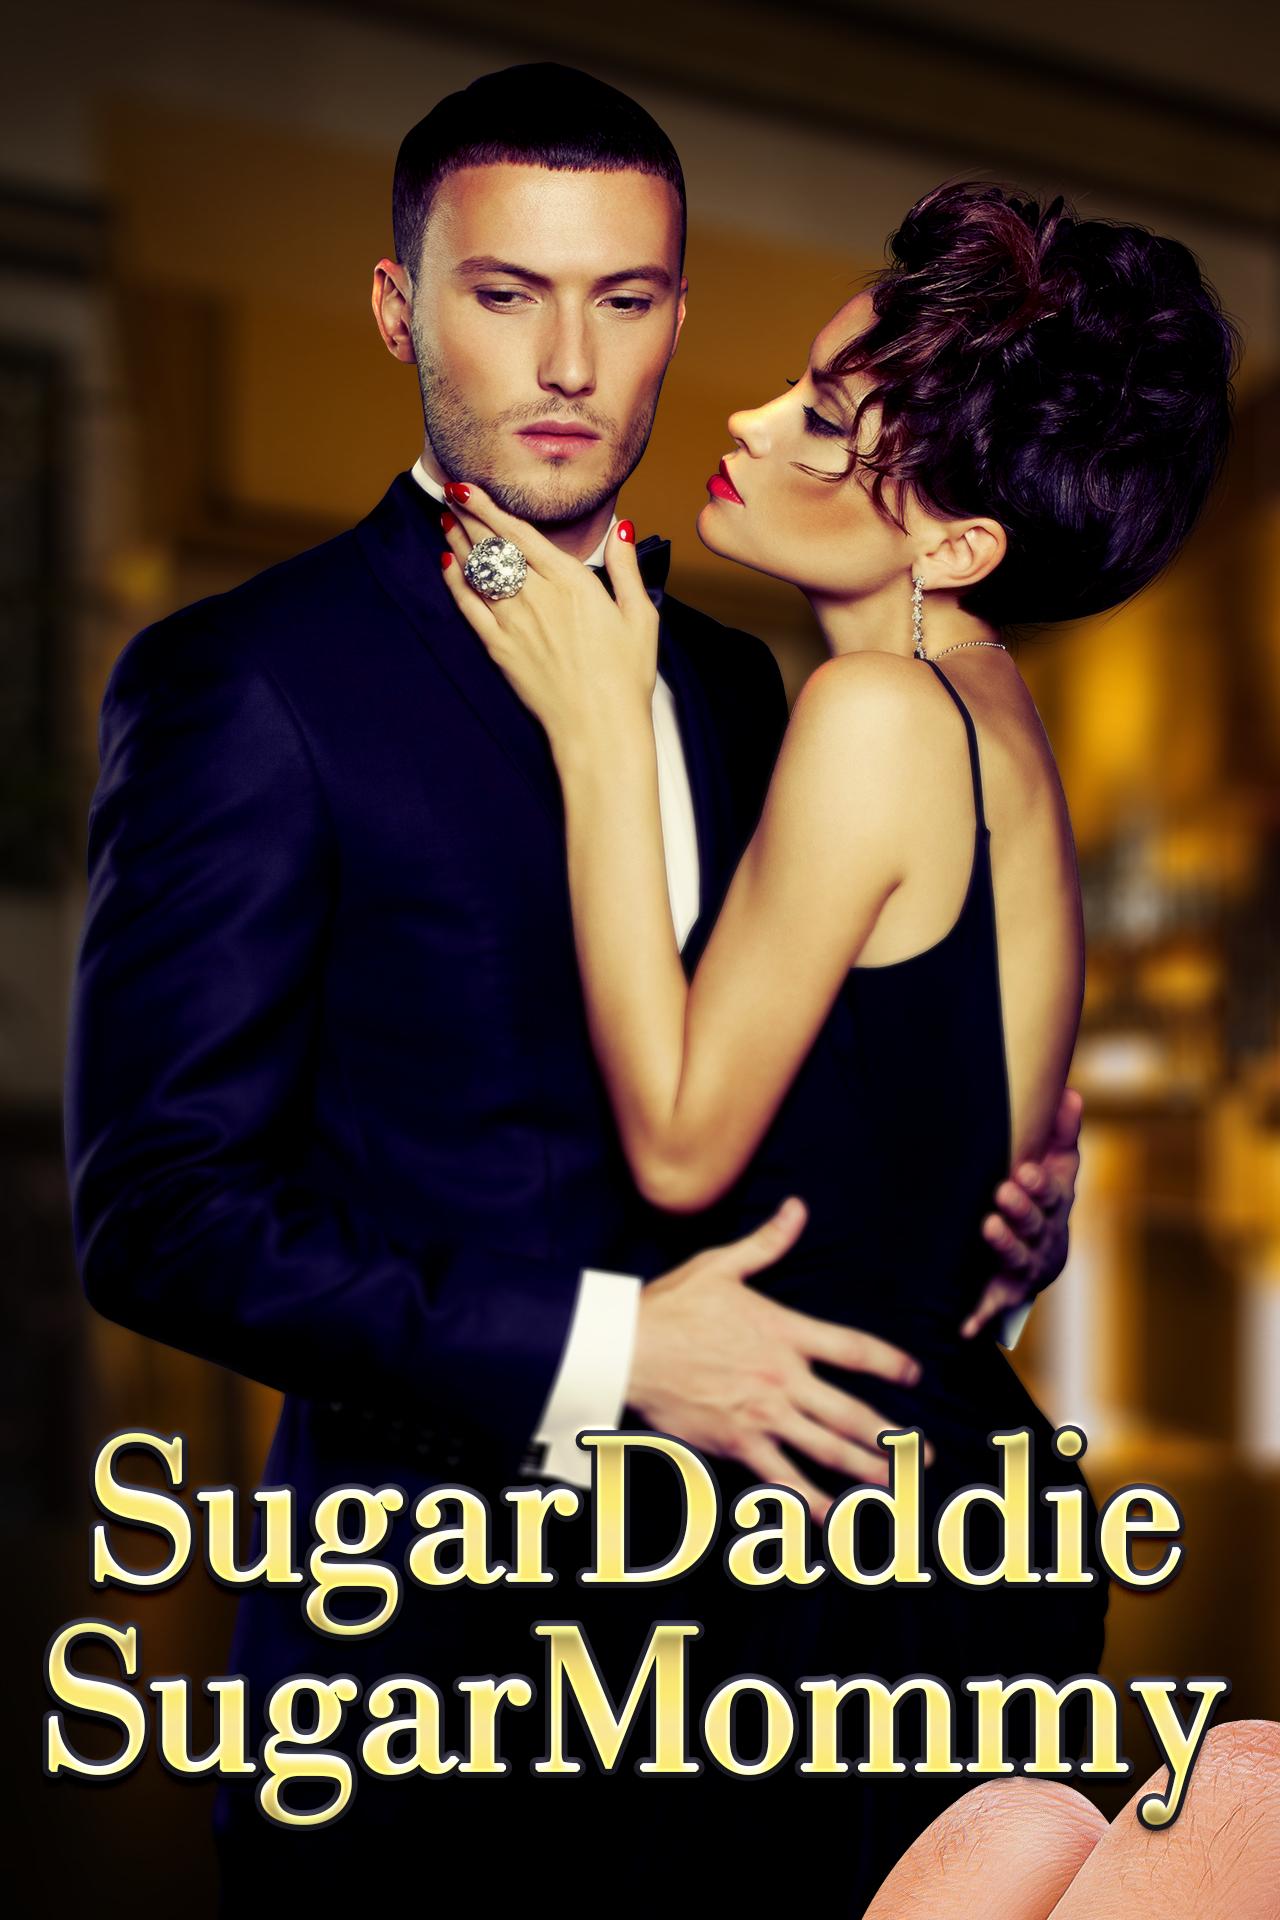 Best Sugar Daddy Sites & Apps (With Prices, Reviews, Security)